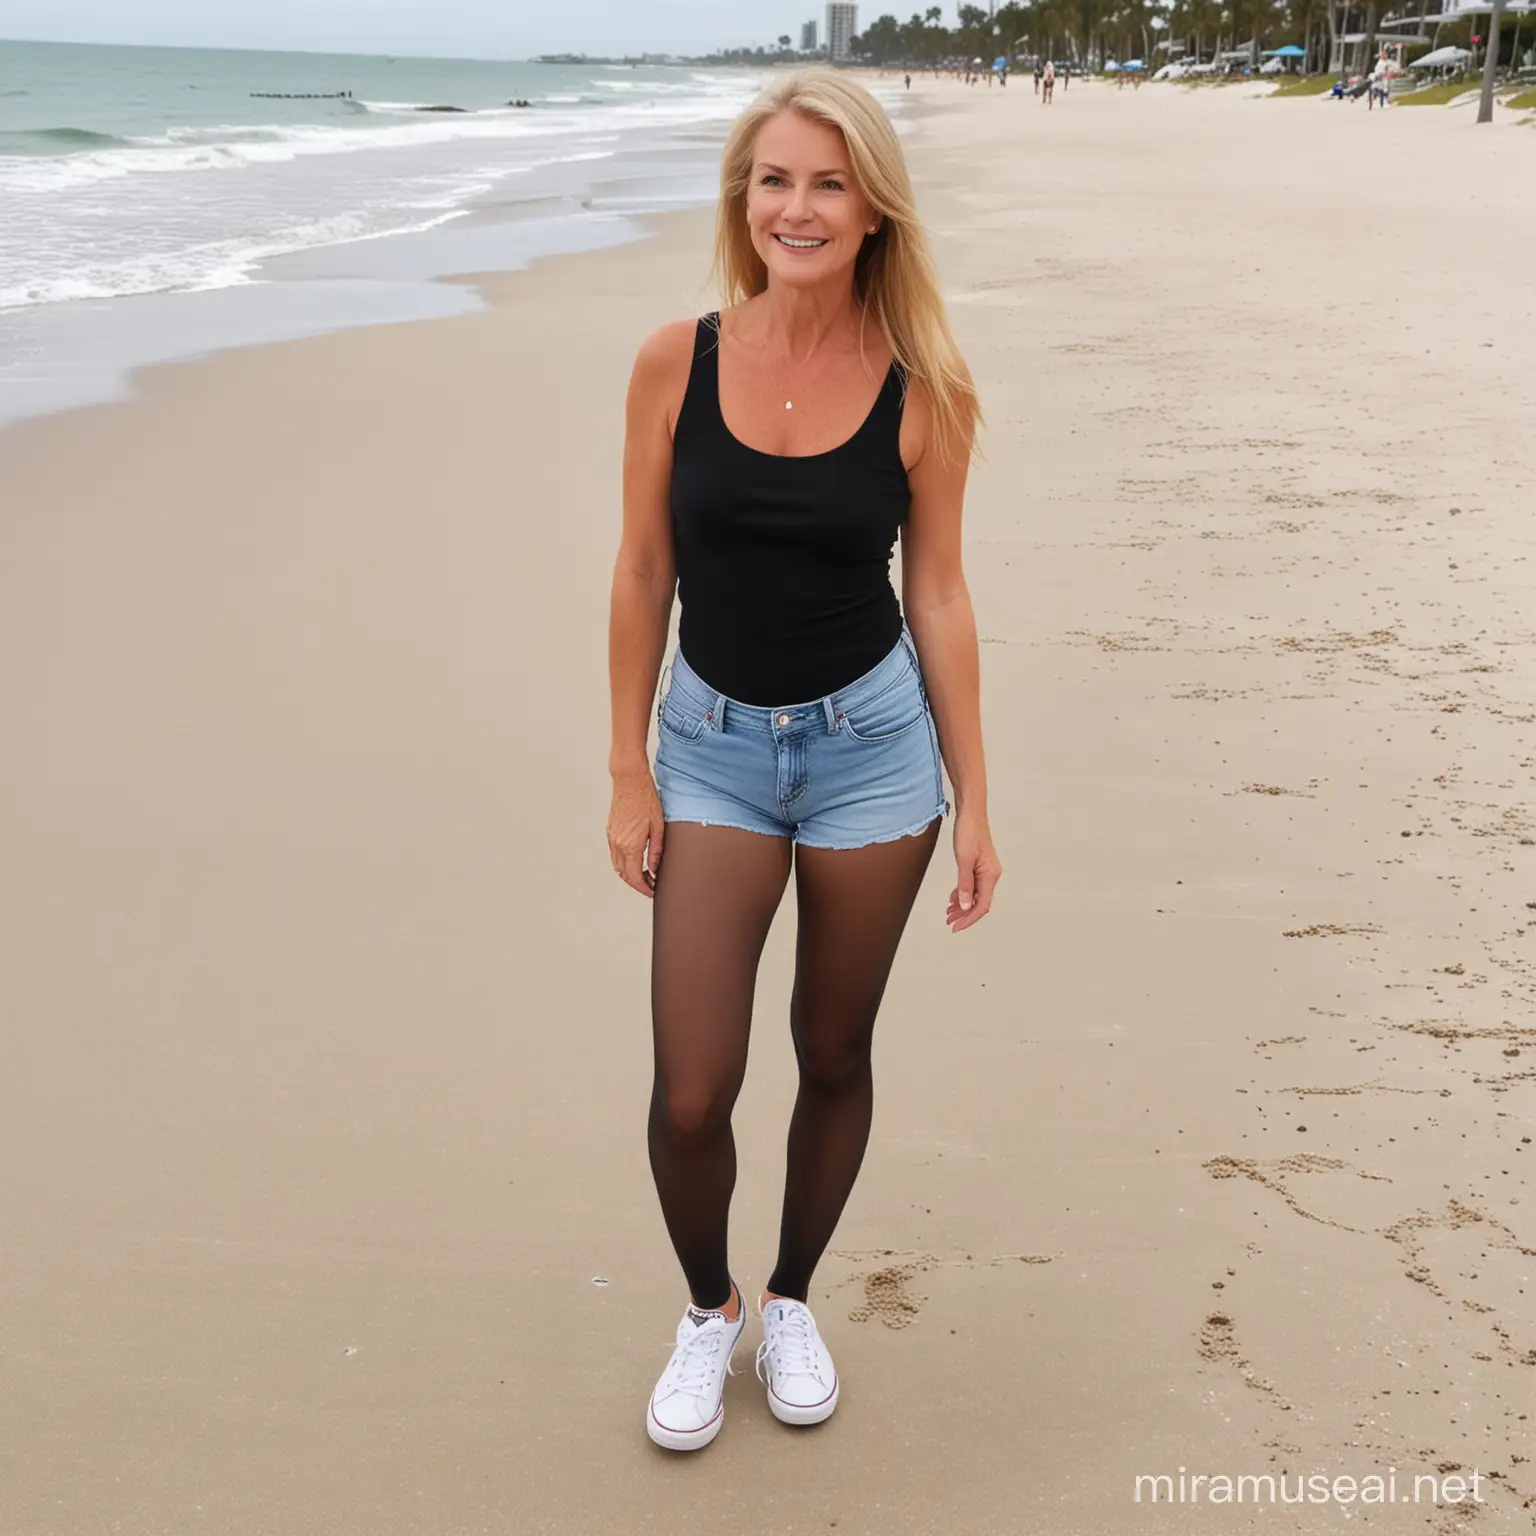 60 year old lady, straight golden blonde hair, parted in middle, black pantyhose nylon tights, denim jean shorts, black tank top , white keds sneakers, walking on sandy Florida beach